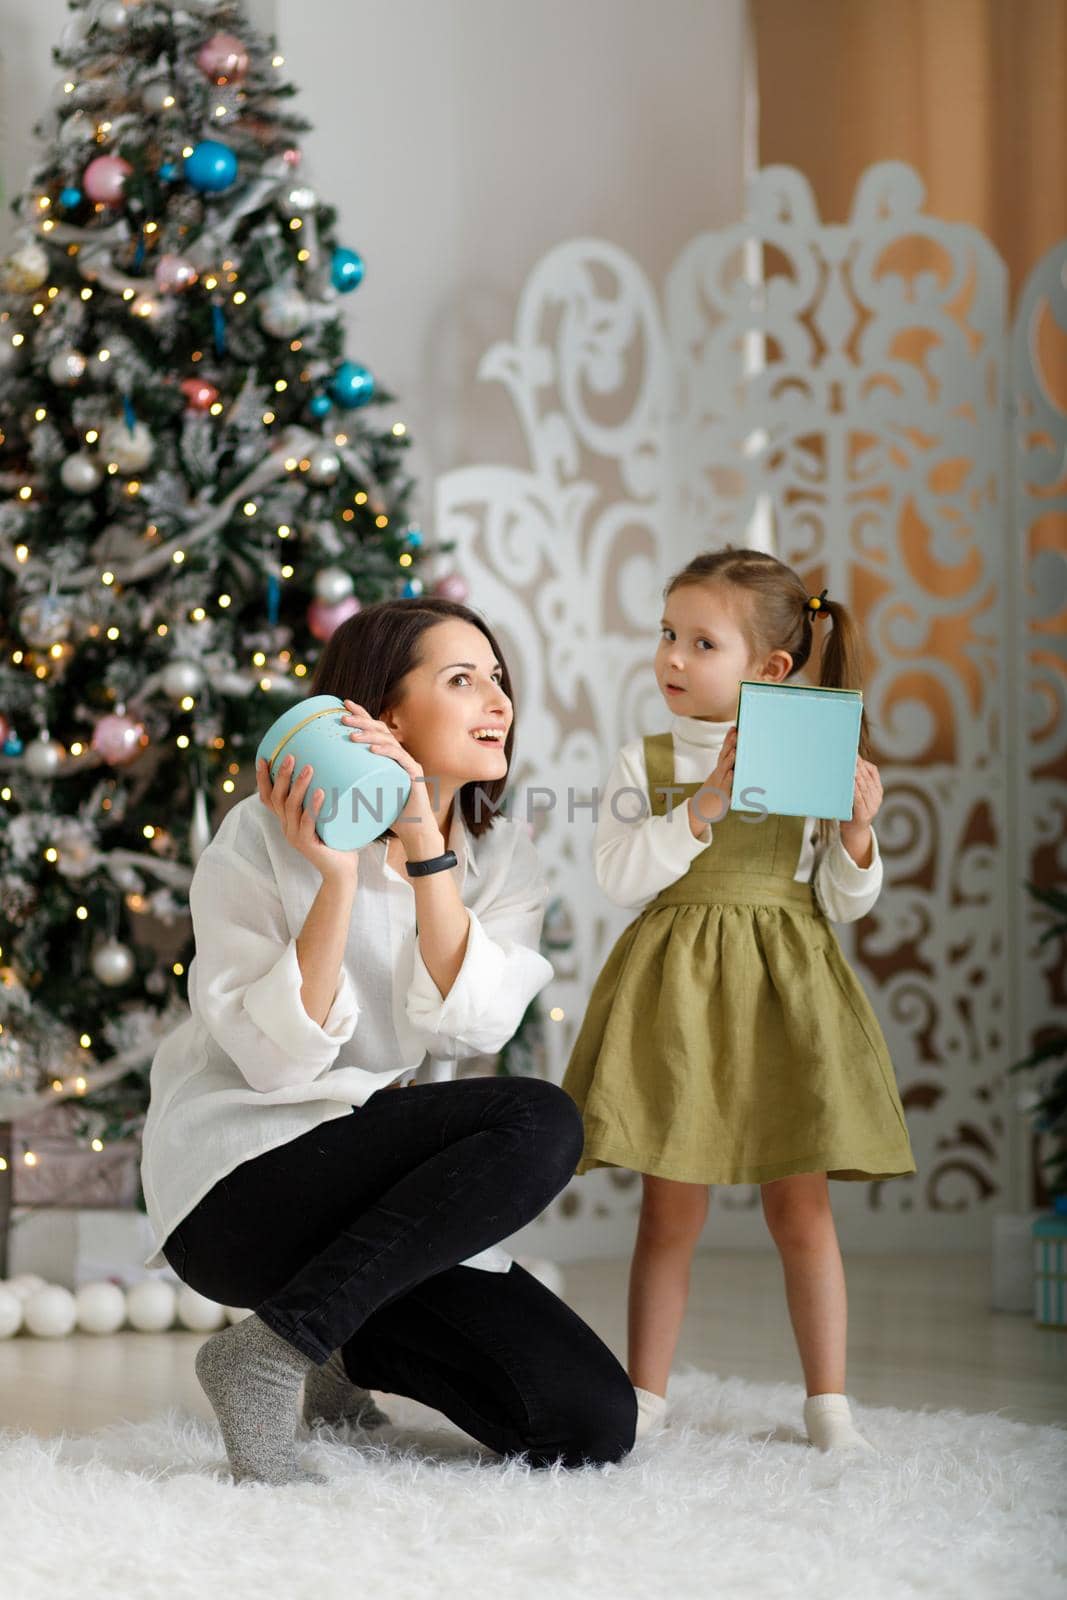 Cute little girl with her mother give each other new year gifts in christmas interior. Vertical, copy space.